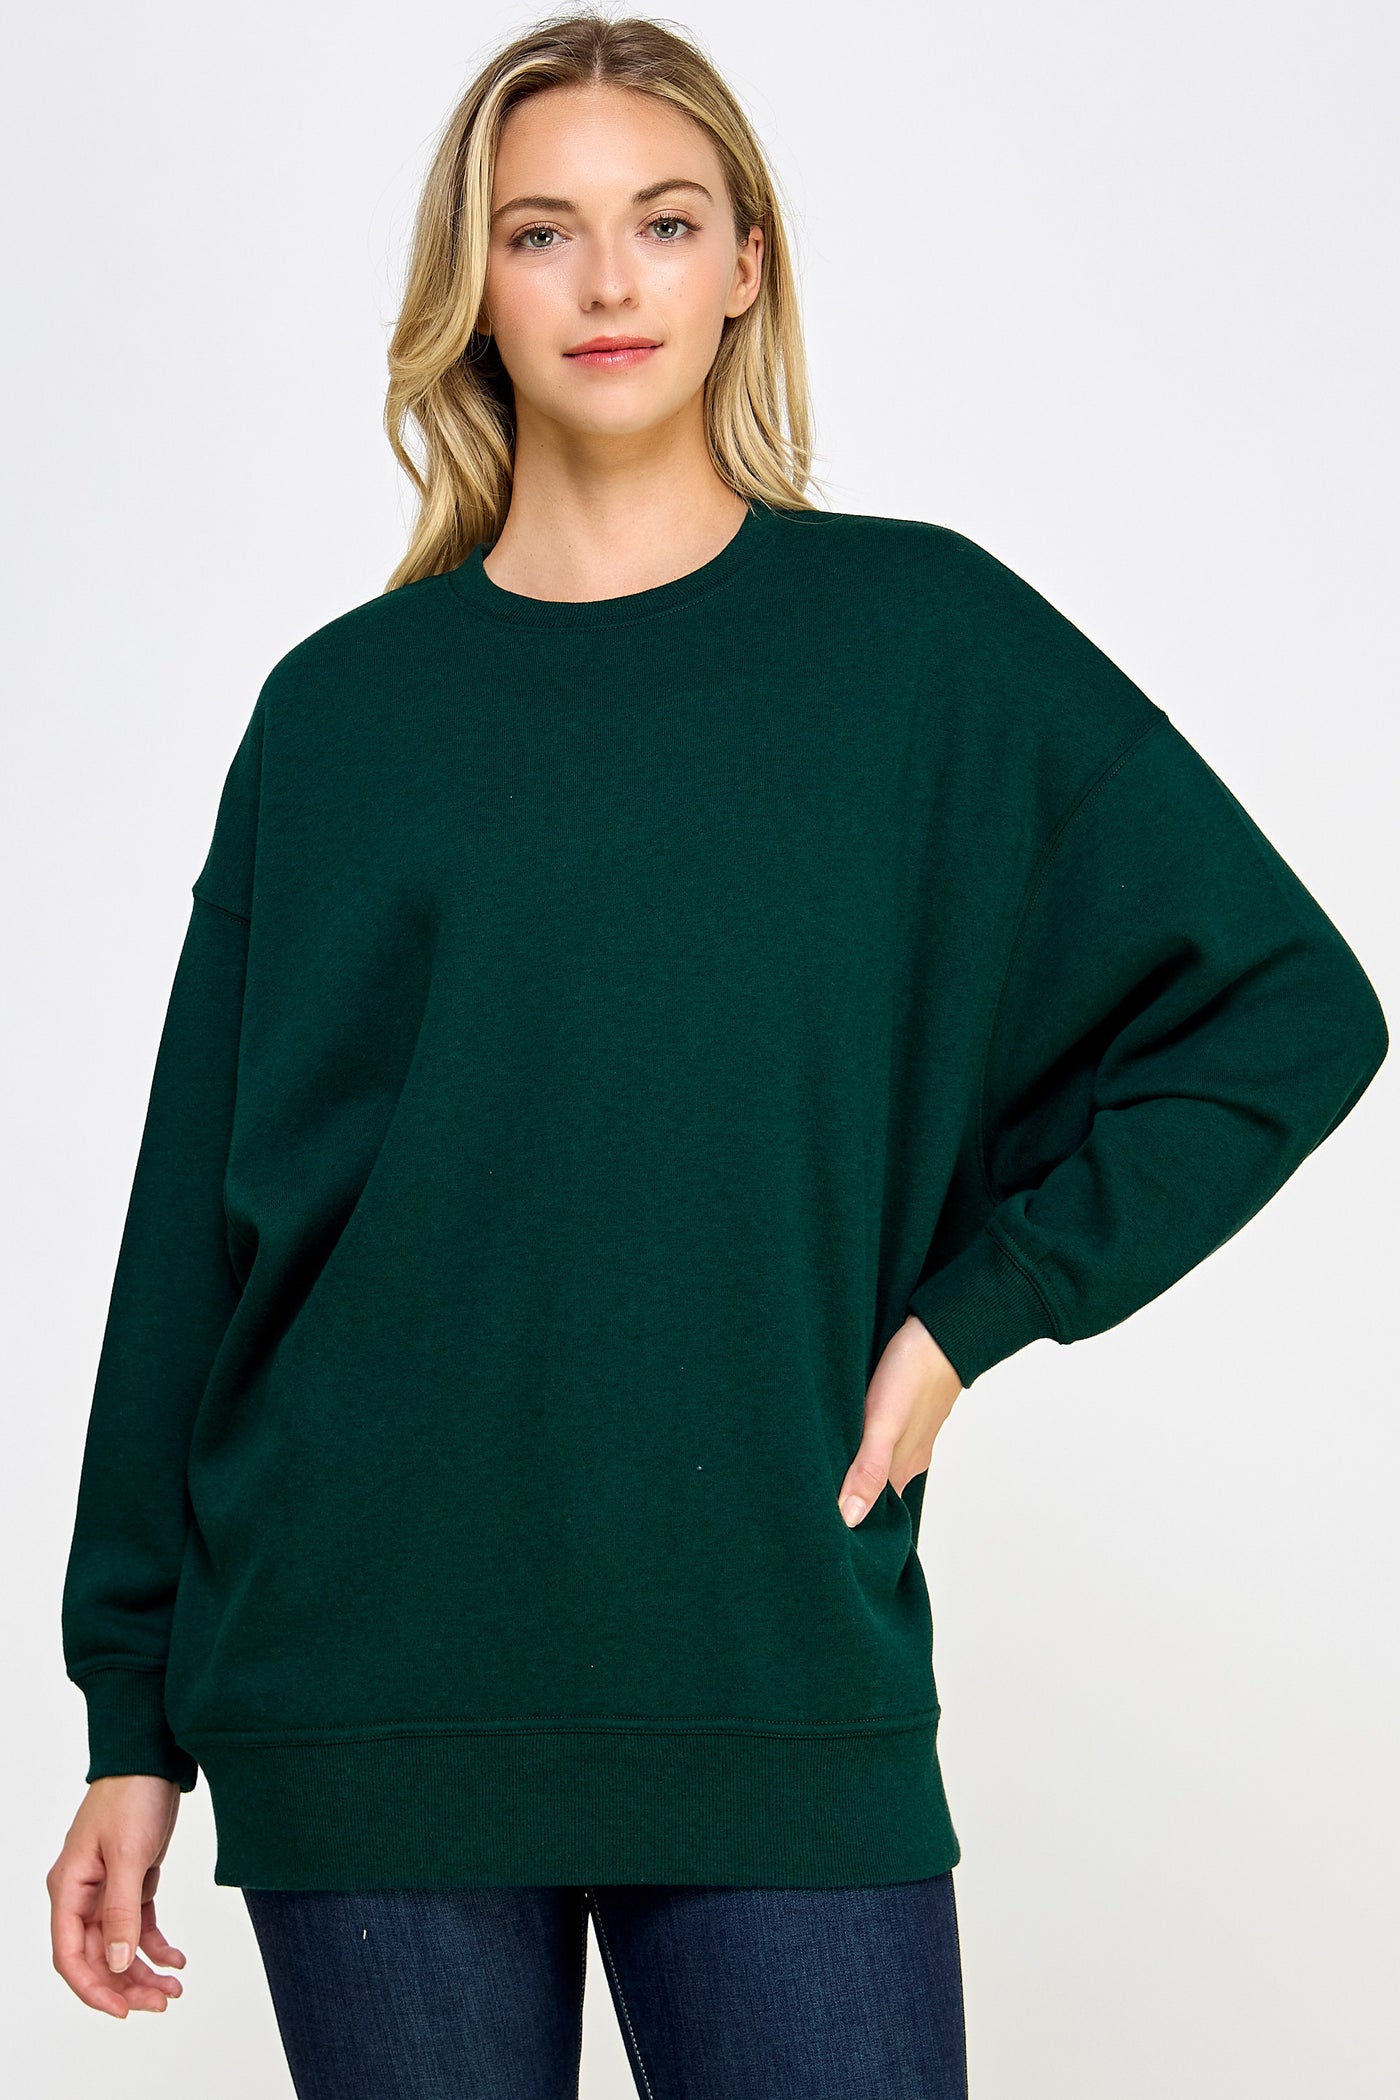 Fleece Relaxed Fit Crew Neck Sweater